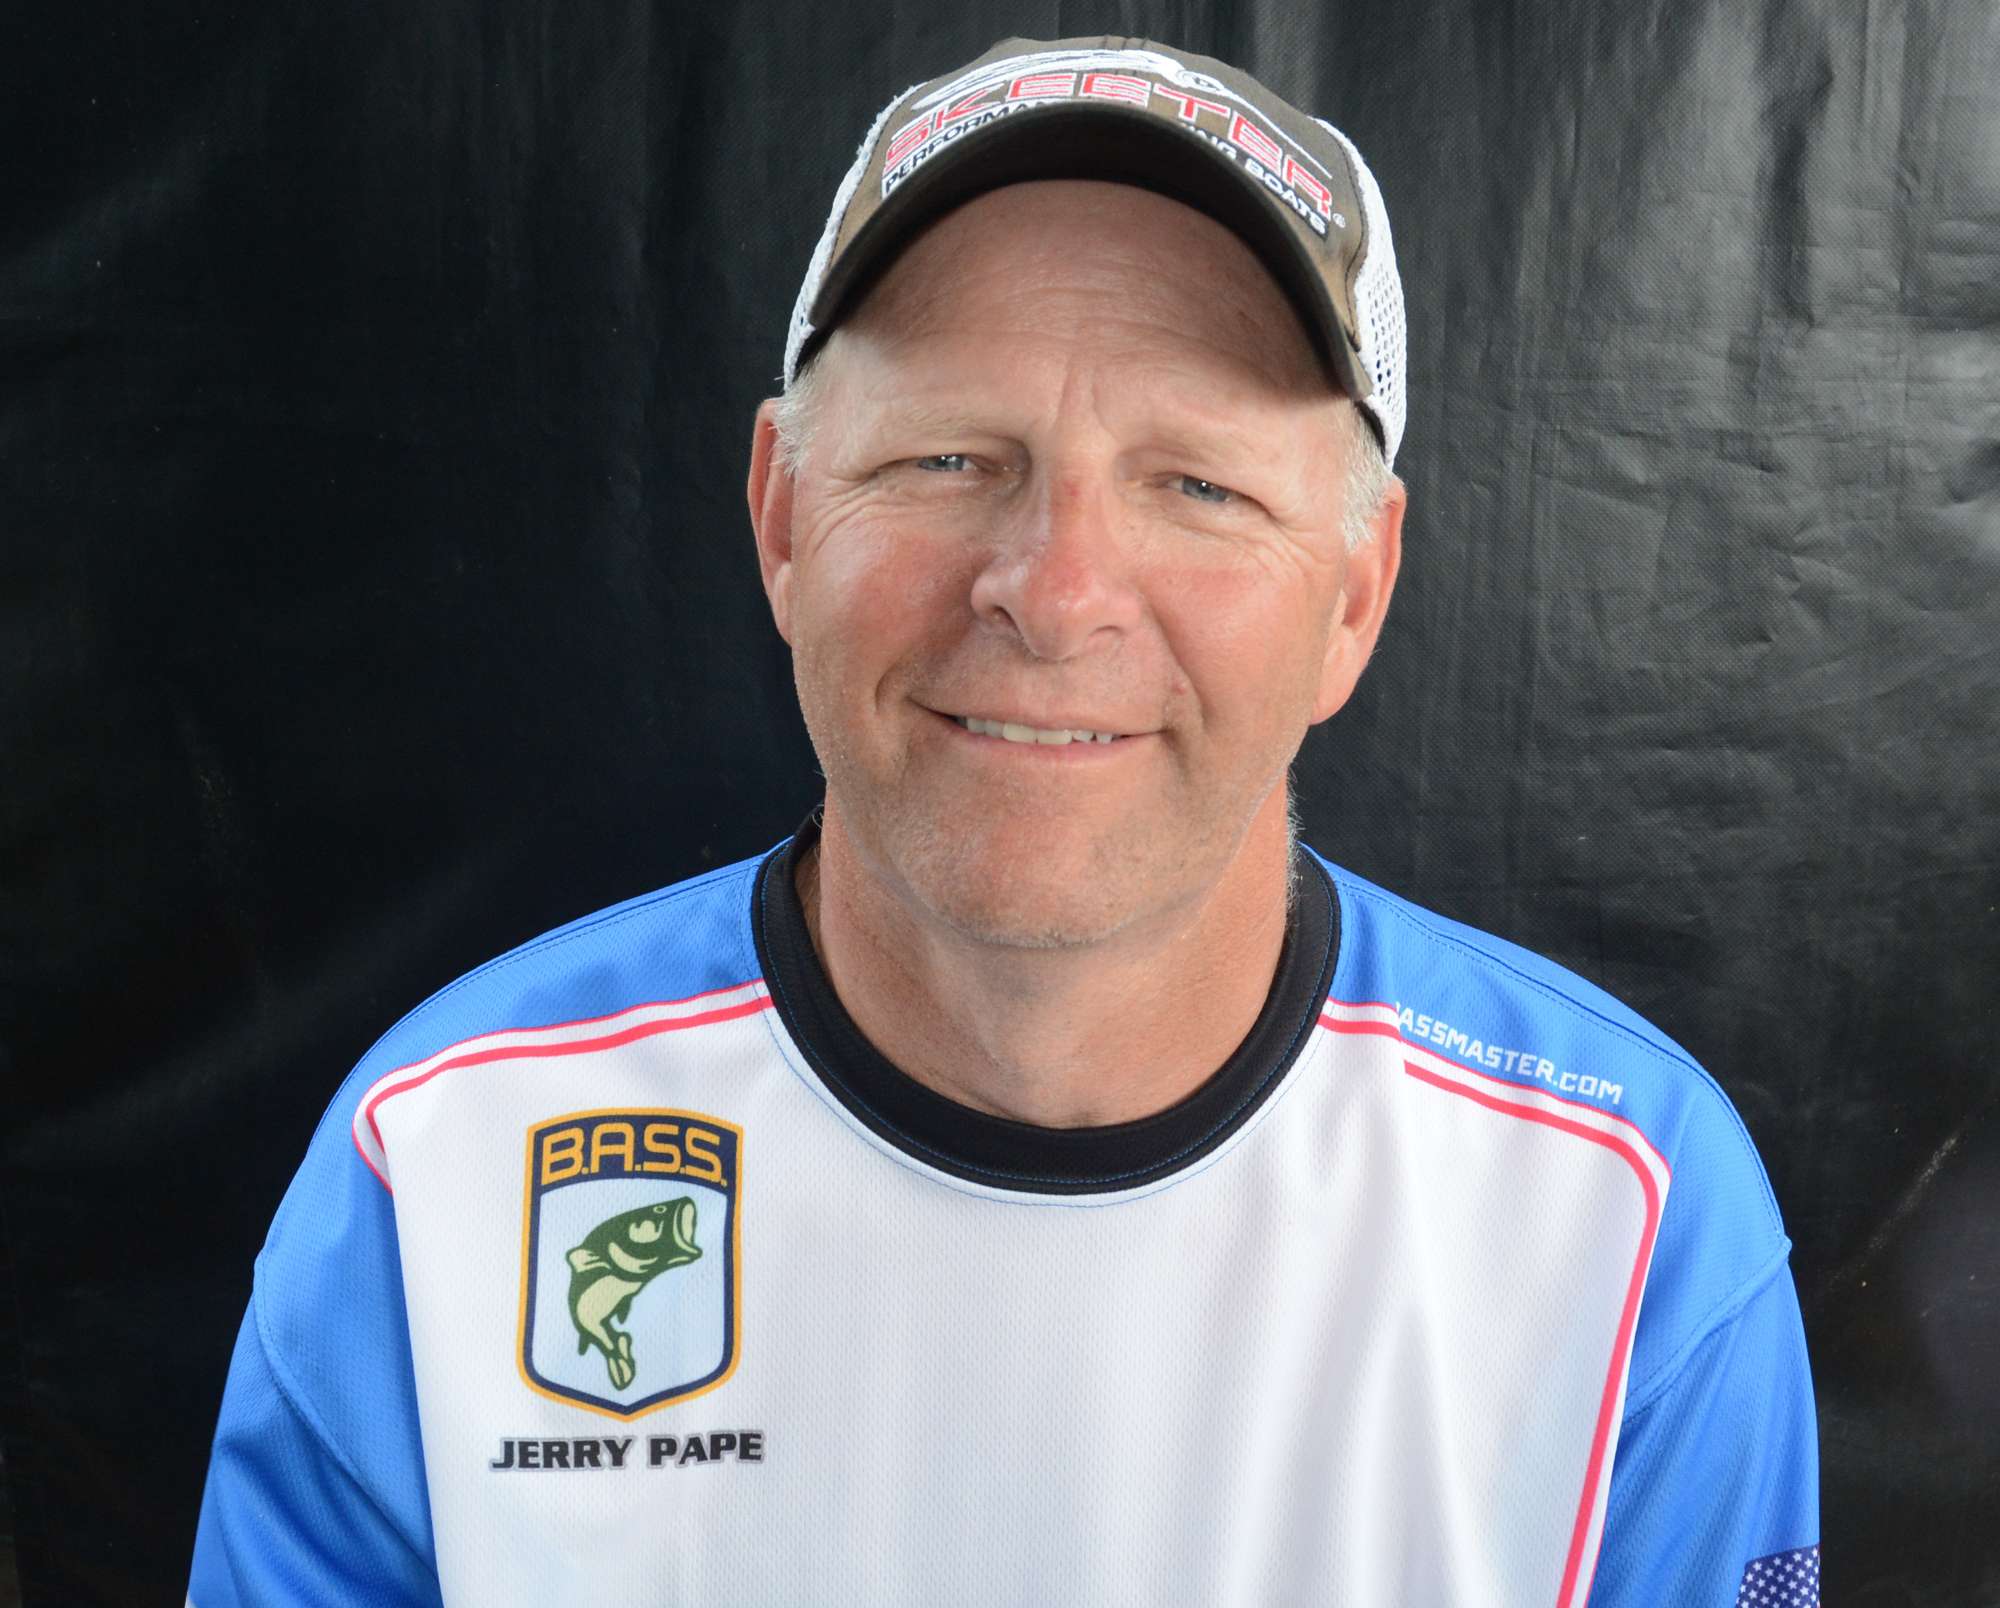 Jerry Pape will represent Nebraska for his first time in the championship. He's a real estate appraiser for work, but for play, he digs bowhunting and golf.